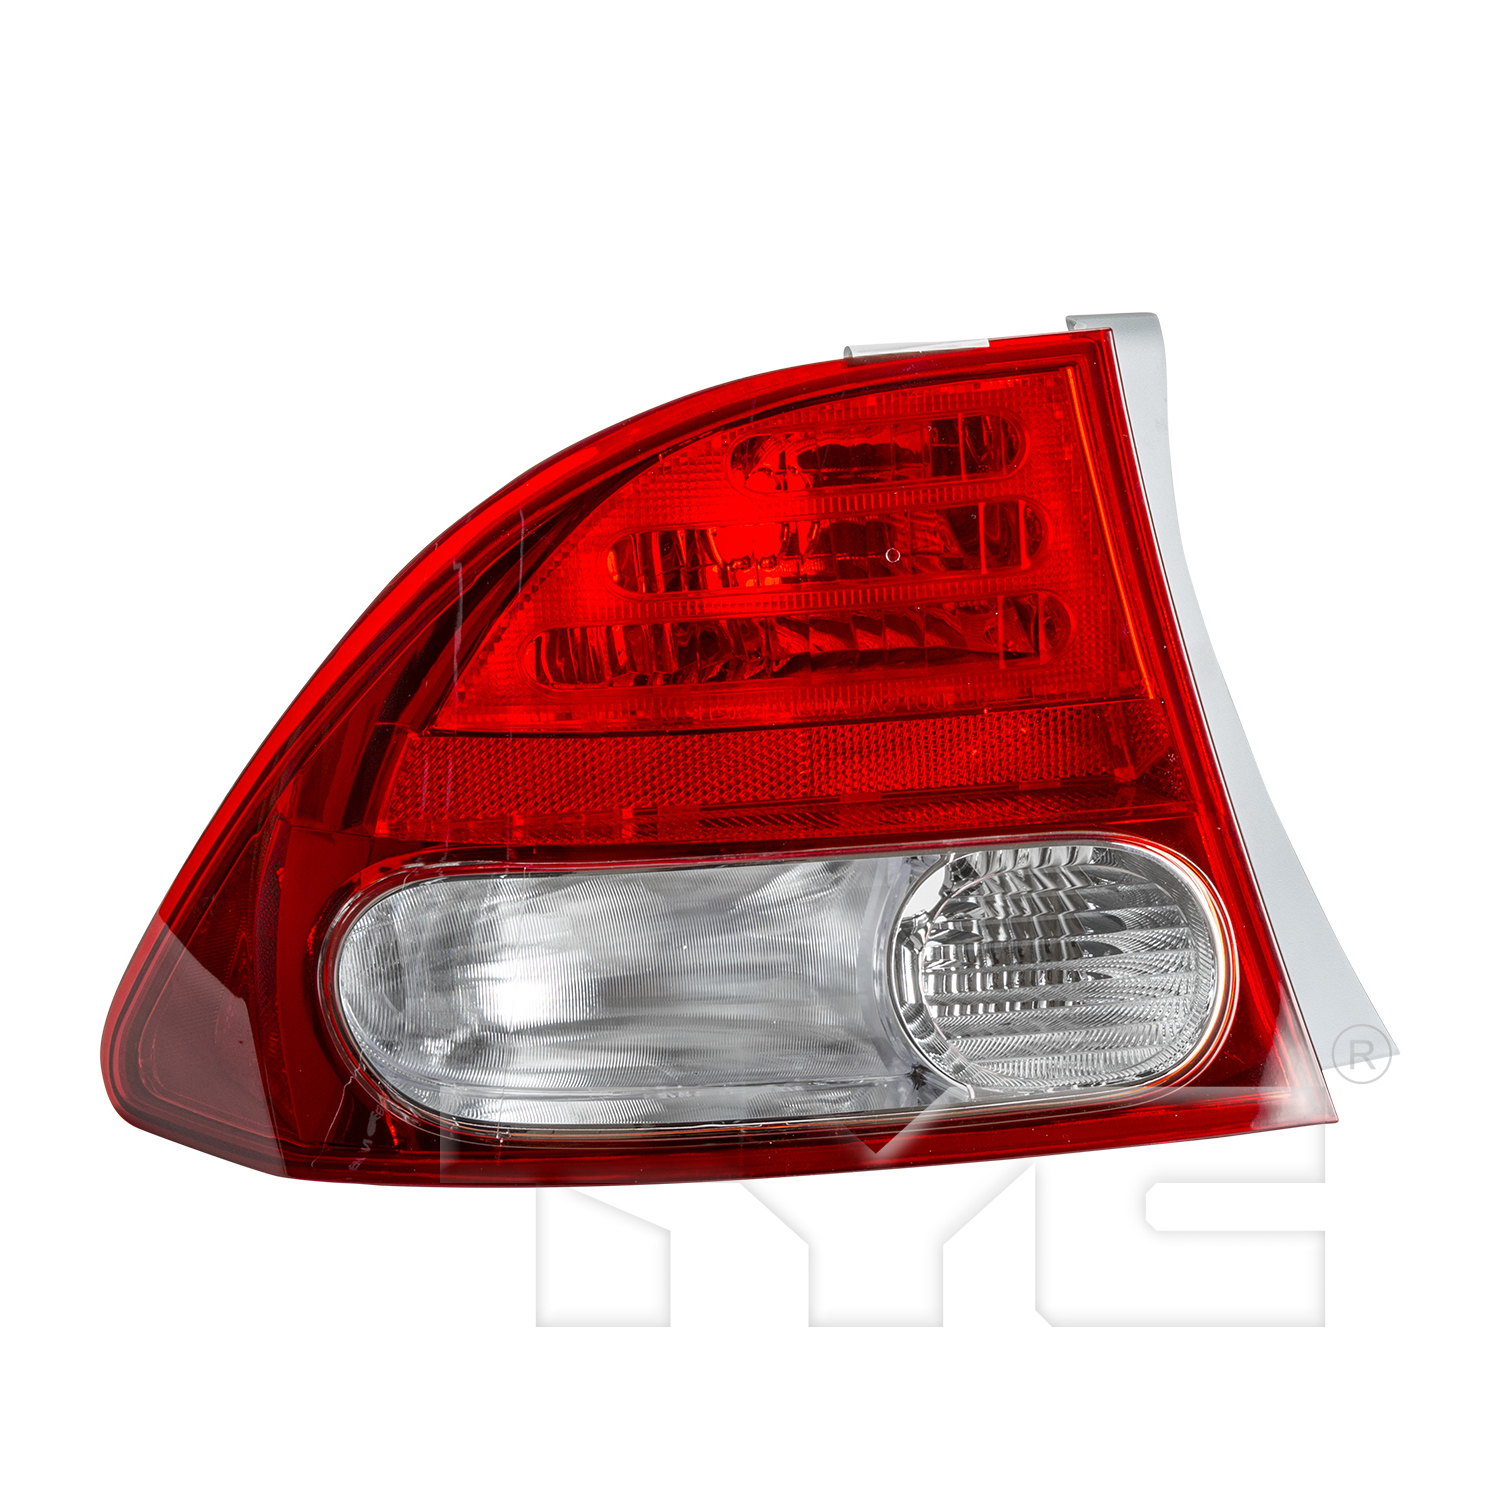 Aftermarket TAILLIGHTS for HONDA - CIVIC, CIVIC,09-11,LT Taillamp lens/housing